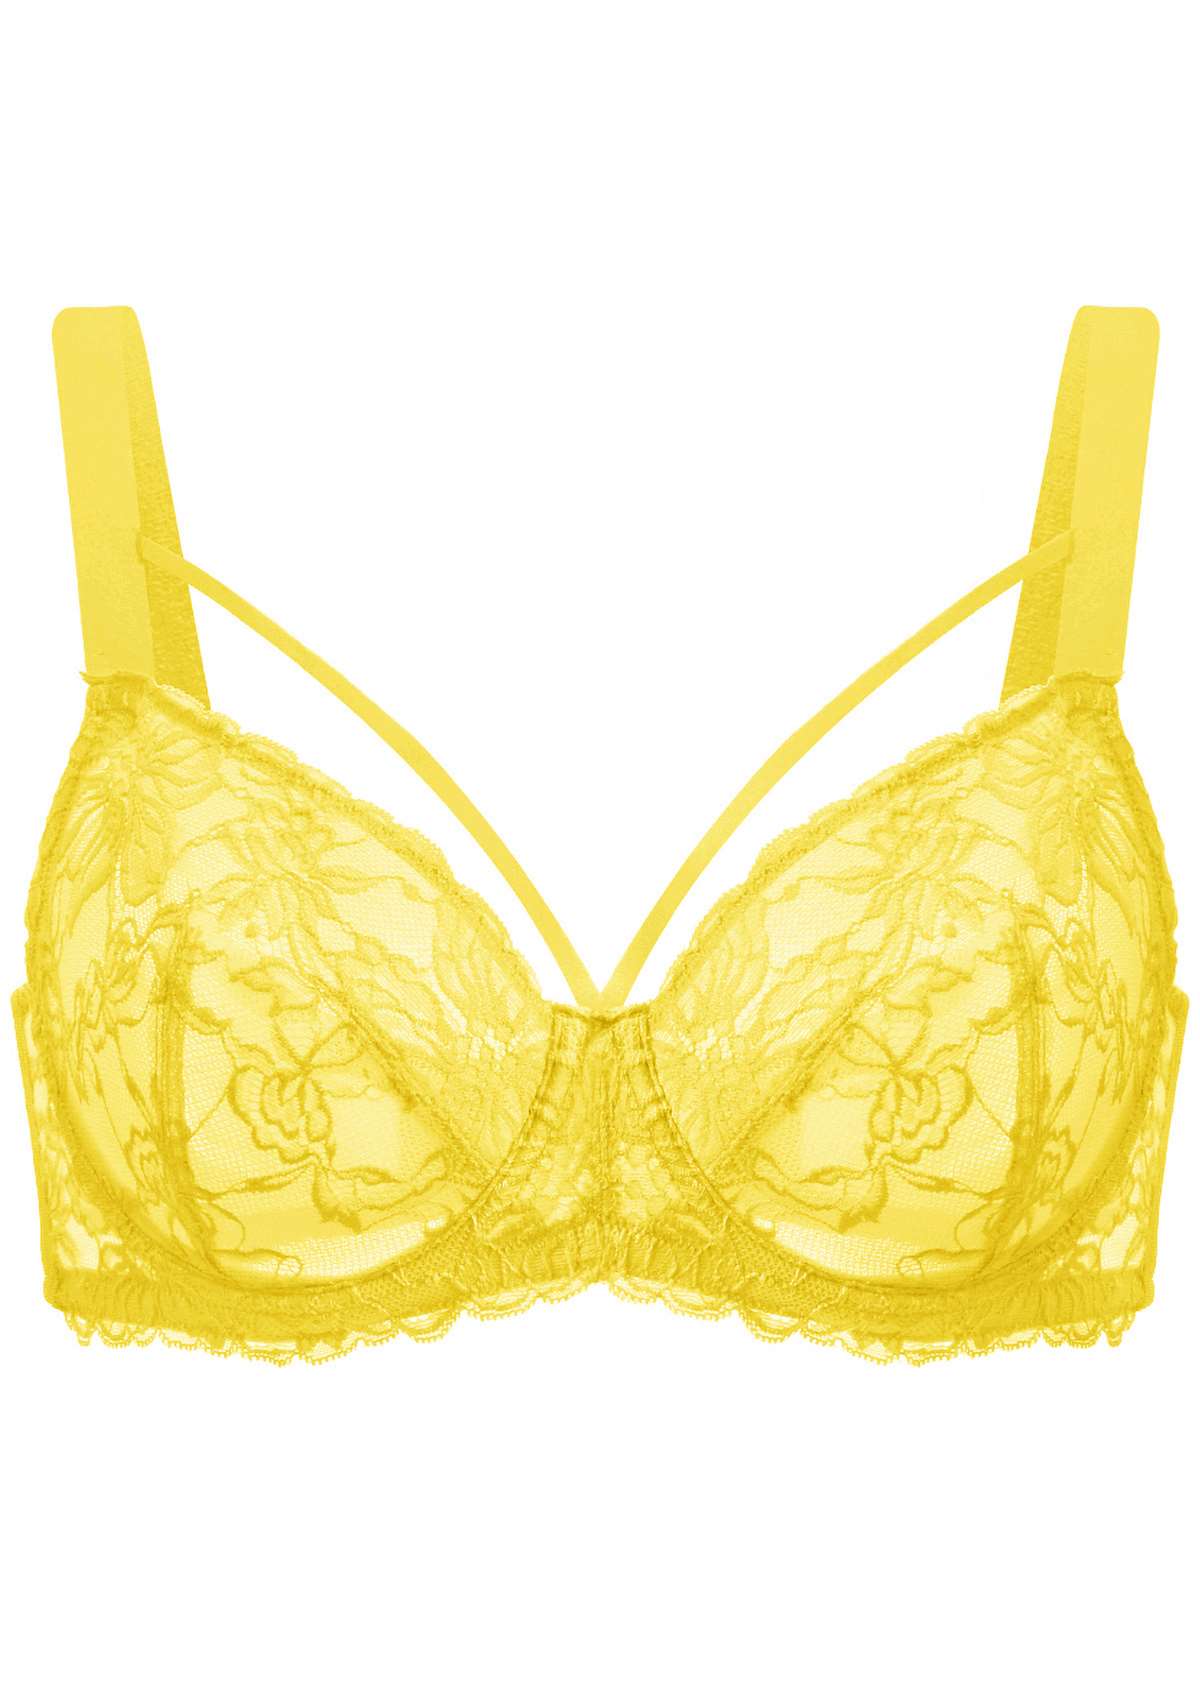 HSIA Unlined Lace Mesh Minimizer Bra For Large Breasts, Full Coverage - Bright Yellow / 36 / DD/E